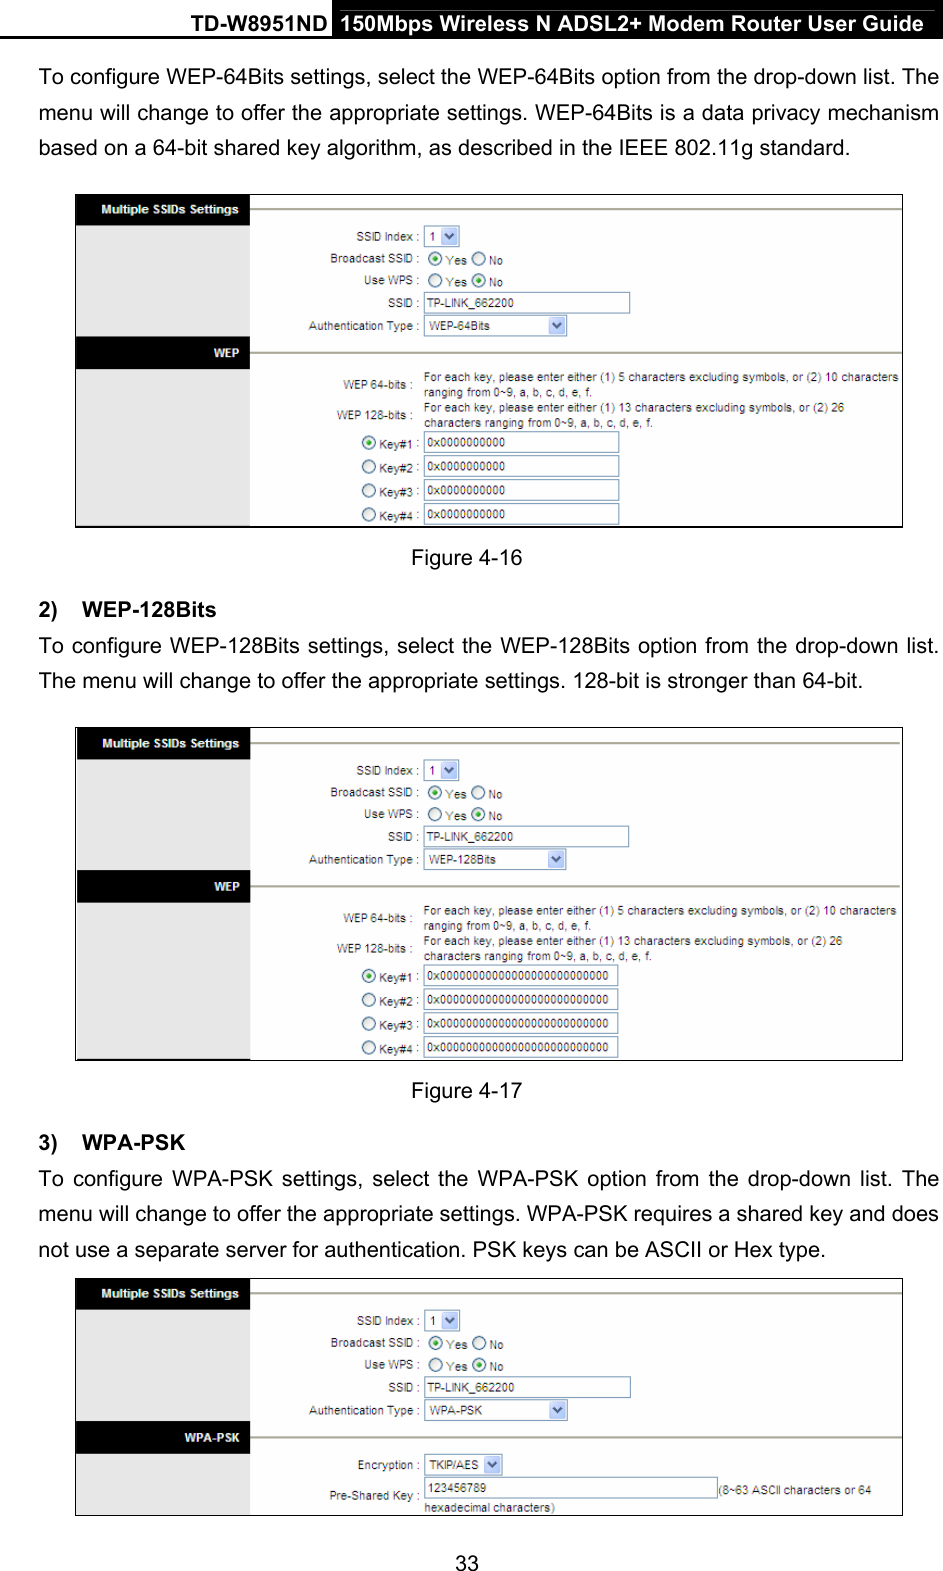 TD-W8951ND  150Mbps Wireless N ADSL2+ Modem Router User Guide To configure WEP-64Bits settings, select the WEP-64Bits option from the drop-down list. The menu will change to offer the appropriate settings. WEP-64Bits is a data privacy mechanism based on a 64-bit shared key algorithm, as described in the IEEE 802.11g standard.  Figure 4-16 2) WEP-128Bits To configure WEP-128Bits settings, select the WEP-128Bits option from the drop-down list. The menu will change to offer the appropriate settings. 128-bit is stronger than 64-bit.  Figure 4-17 3) WPA-PSK To configure WPA-PSK settings, select the WPA-PSK option from the drop-down list. The menu will change to offer the appropriate settings. WPA-PSK requires a shared key and does not use a separate server for authentication. PSK keys can be ASCII or Hex type.  33 